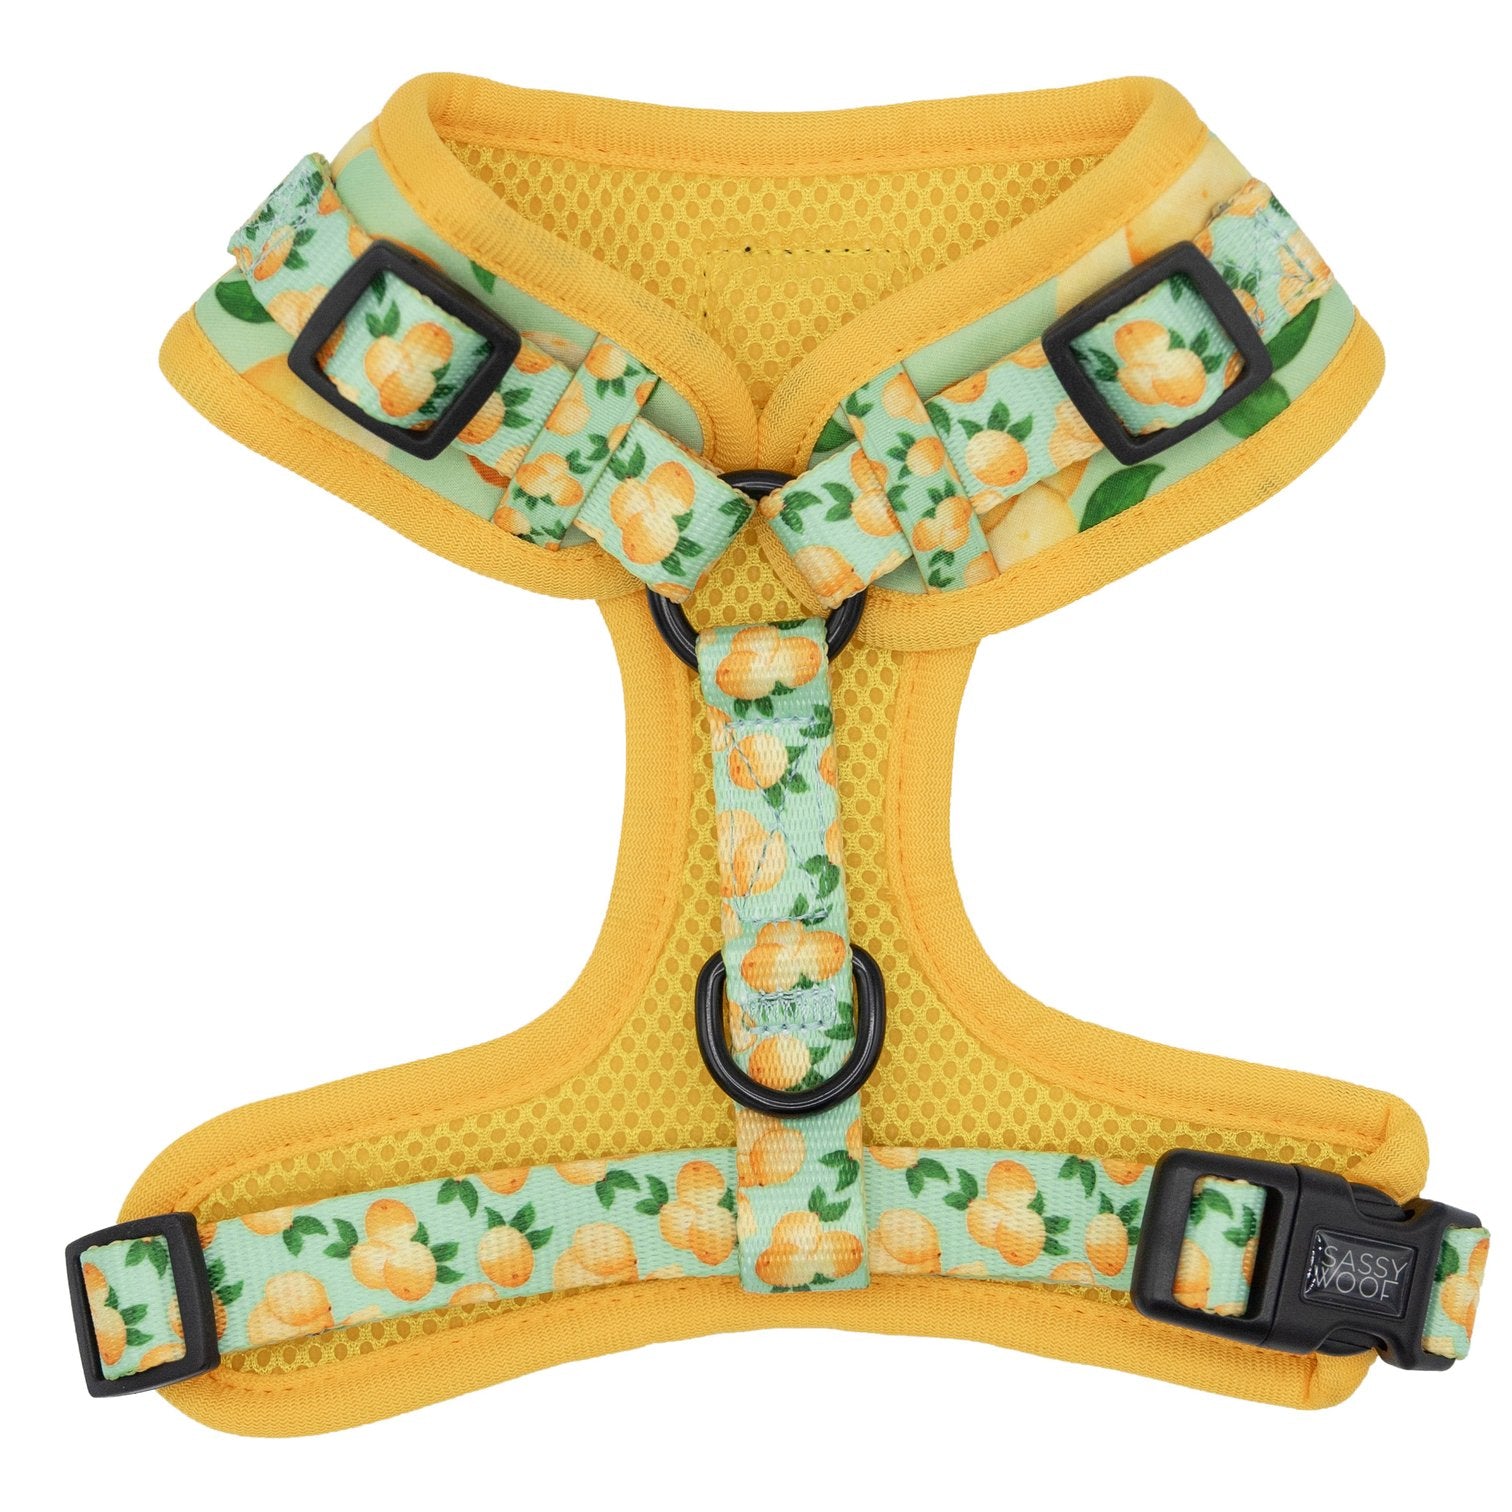 Sassy Woof Adjustable Harness - Main Squeeze [CLEARANCE] - Henlo Pets